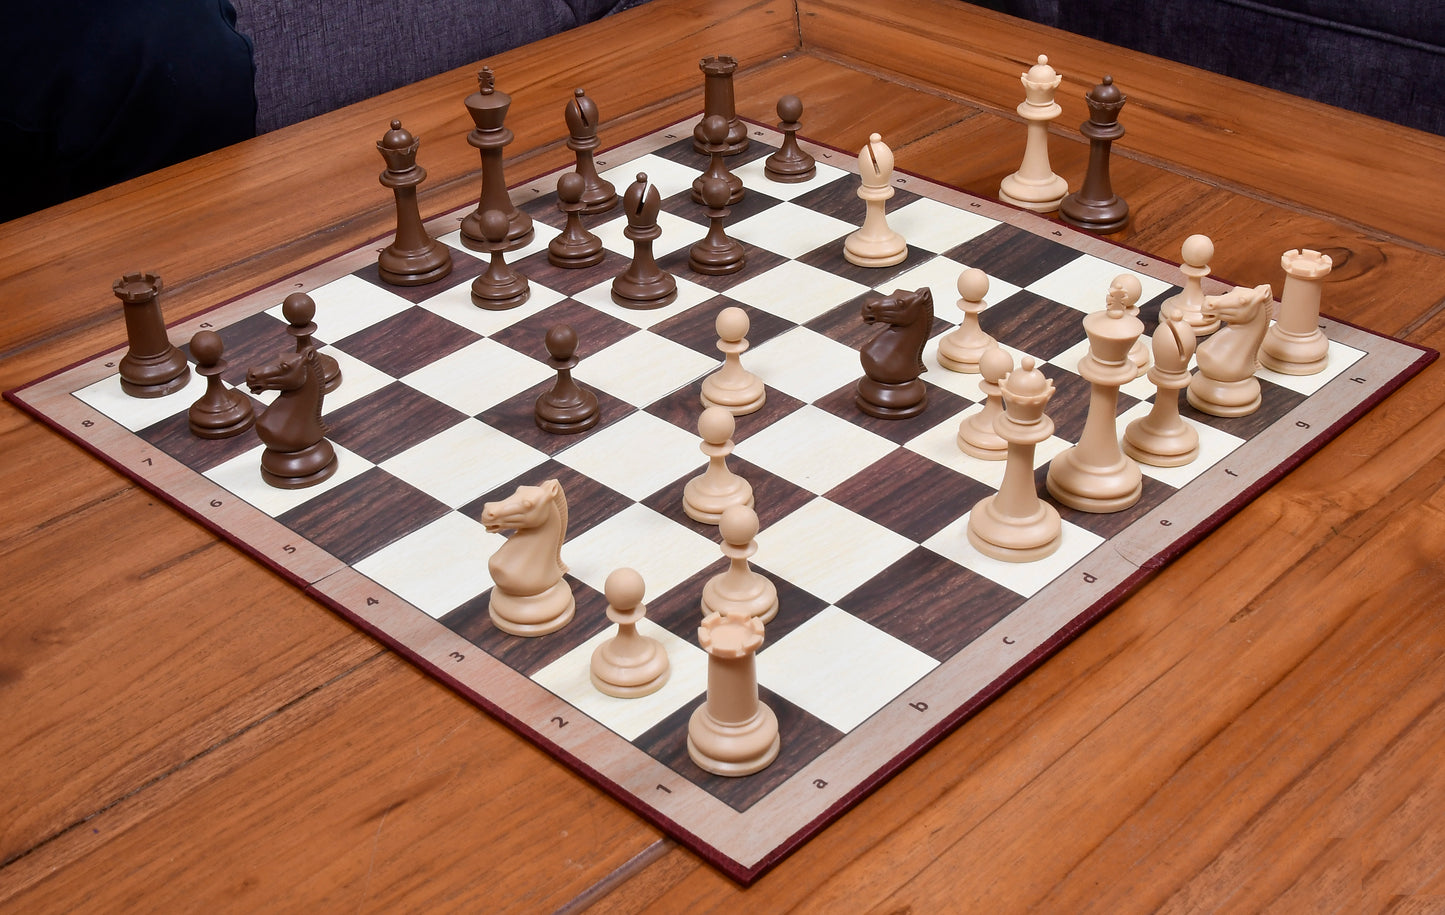 Combo of The Blitz Series Plastic Chess Pieces Dyed in Sandalwood and Chocolate Brown - 3.8" King with Folding Chess Board